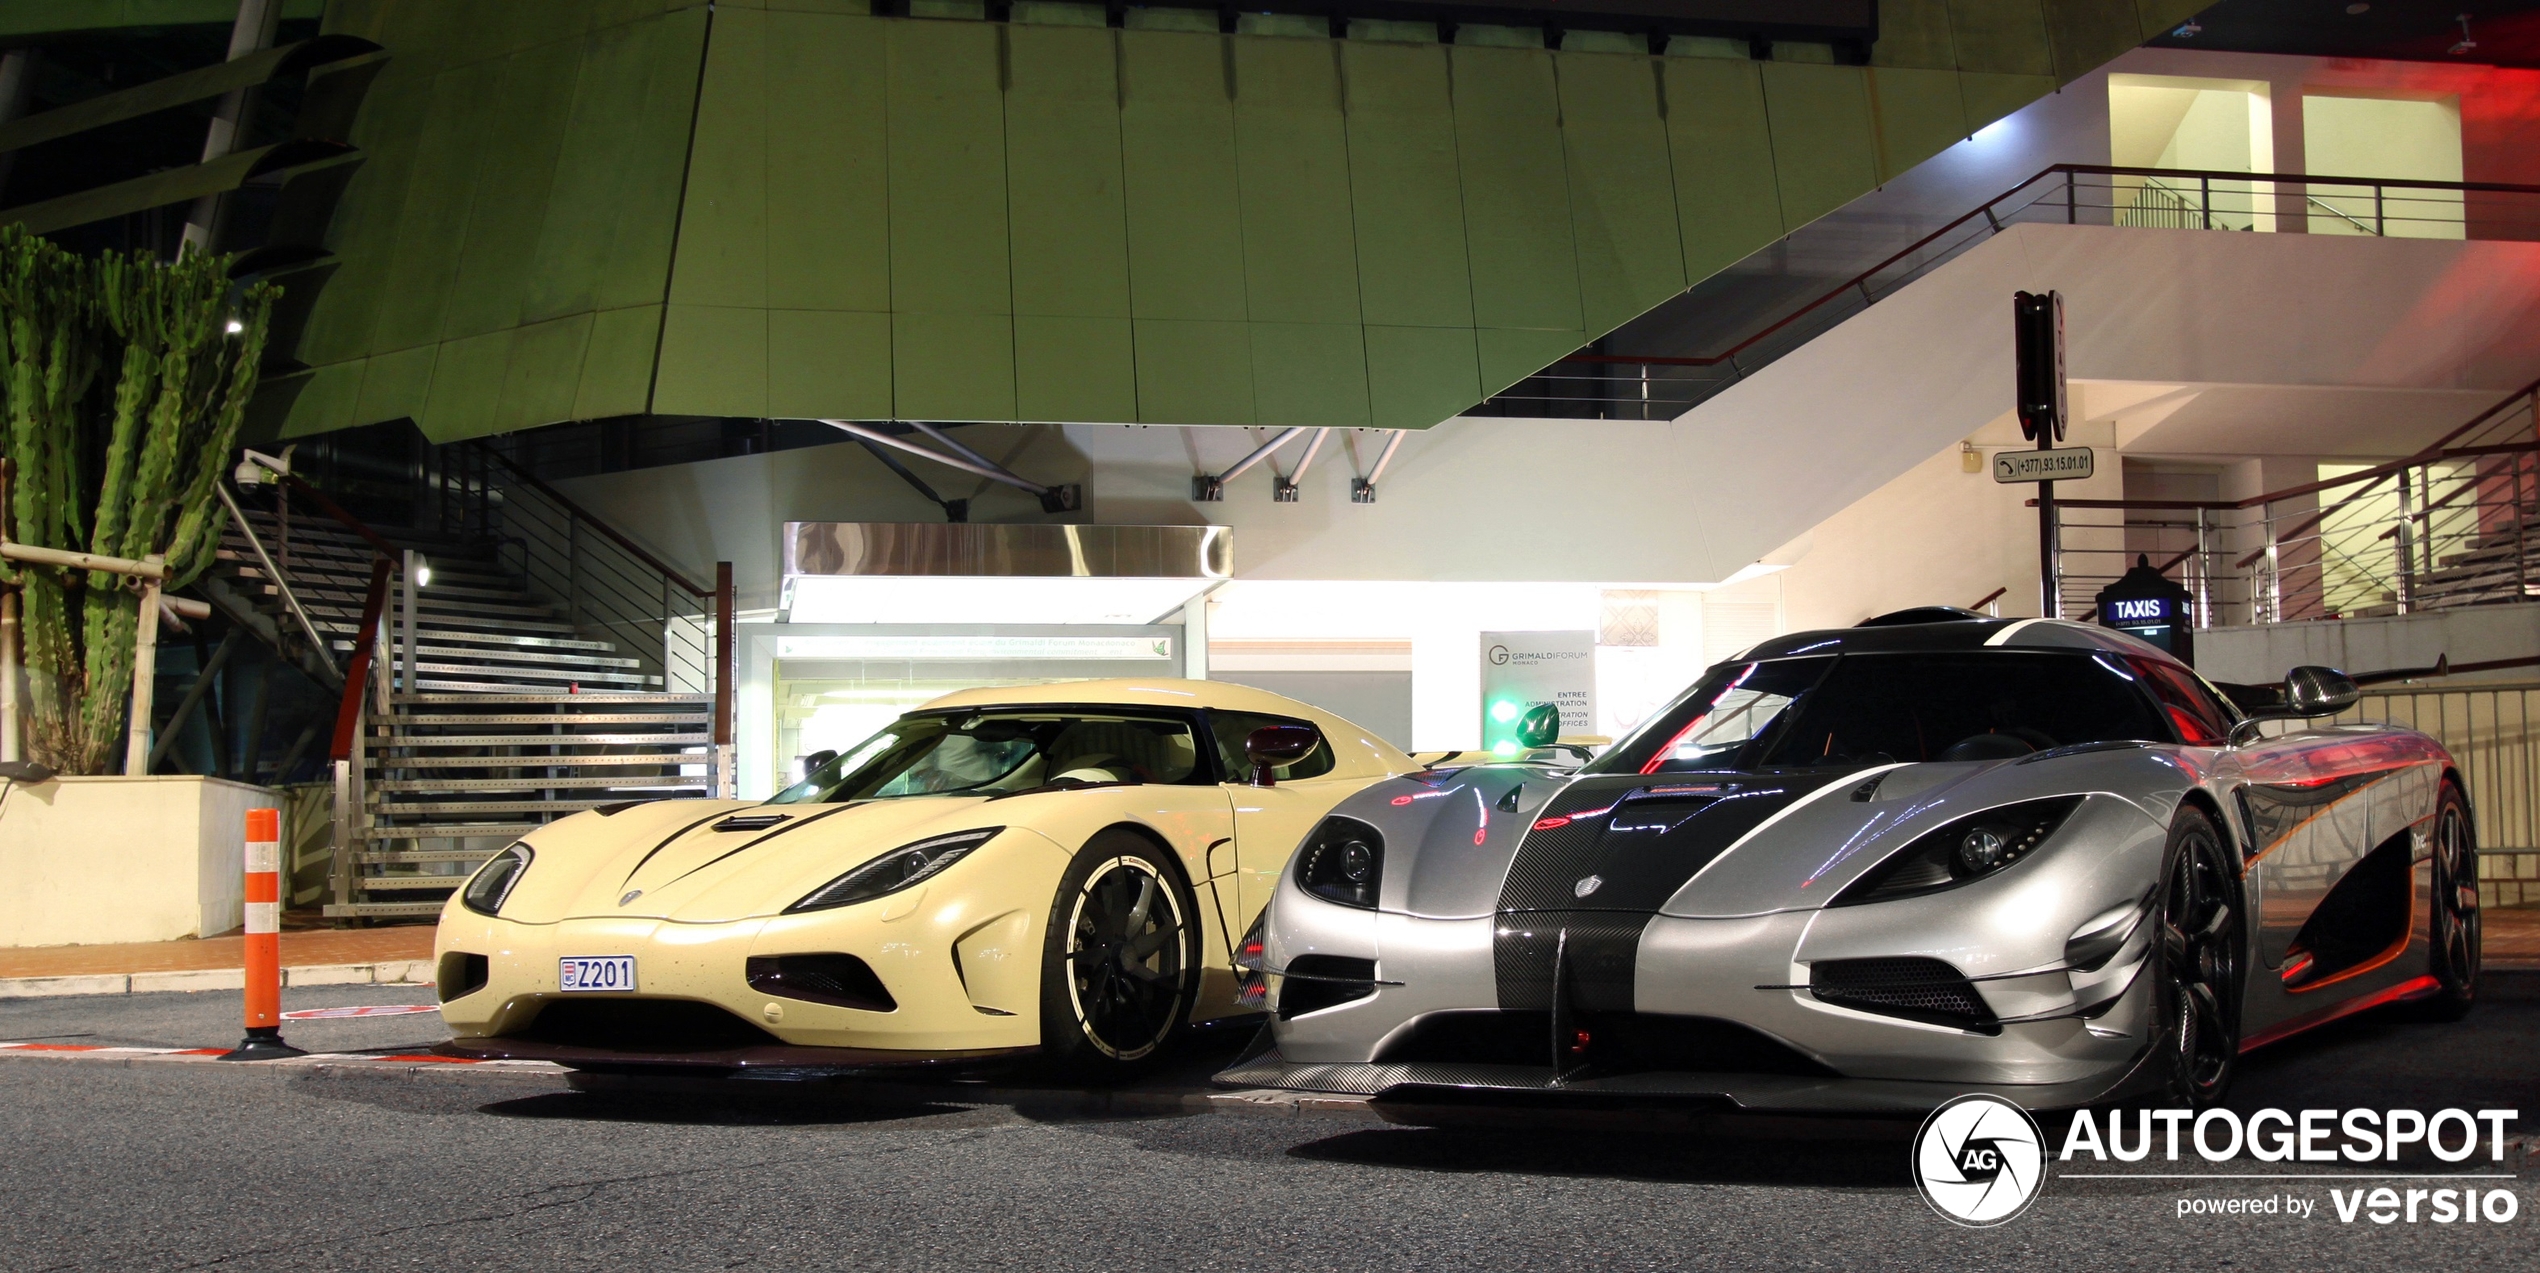 A single Agera doesn't seem to be enough.